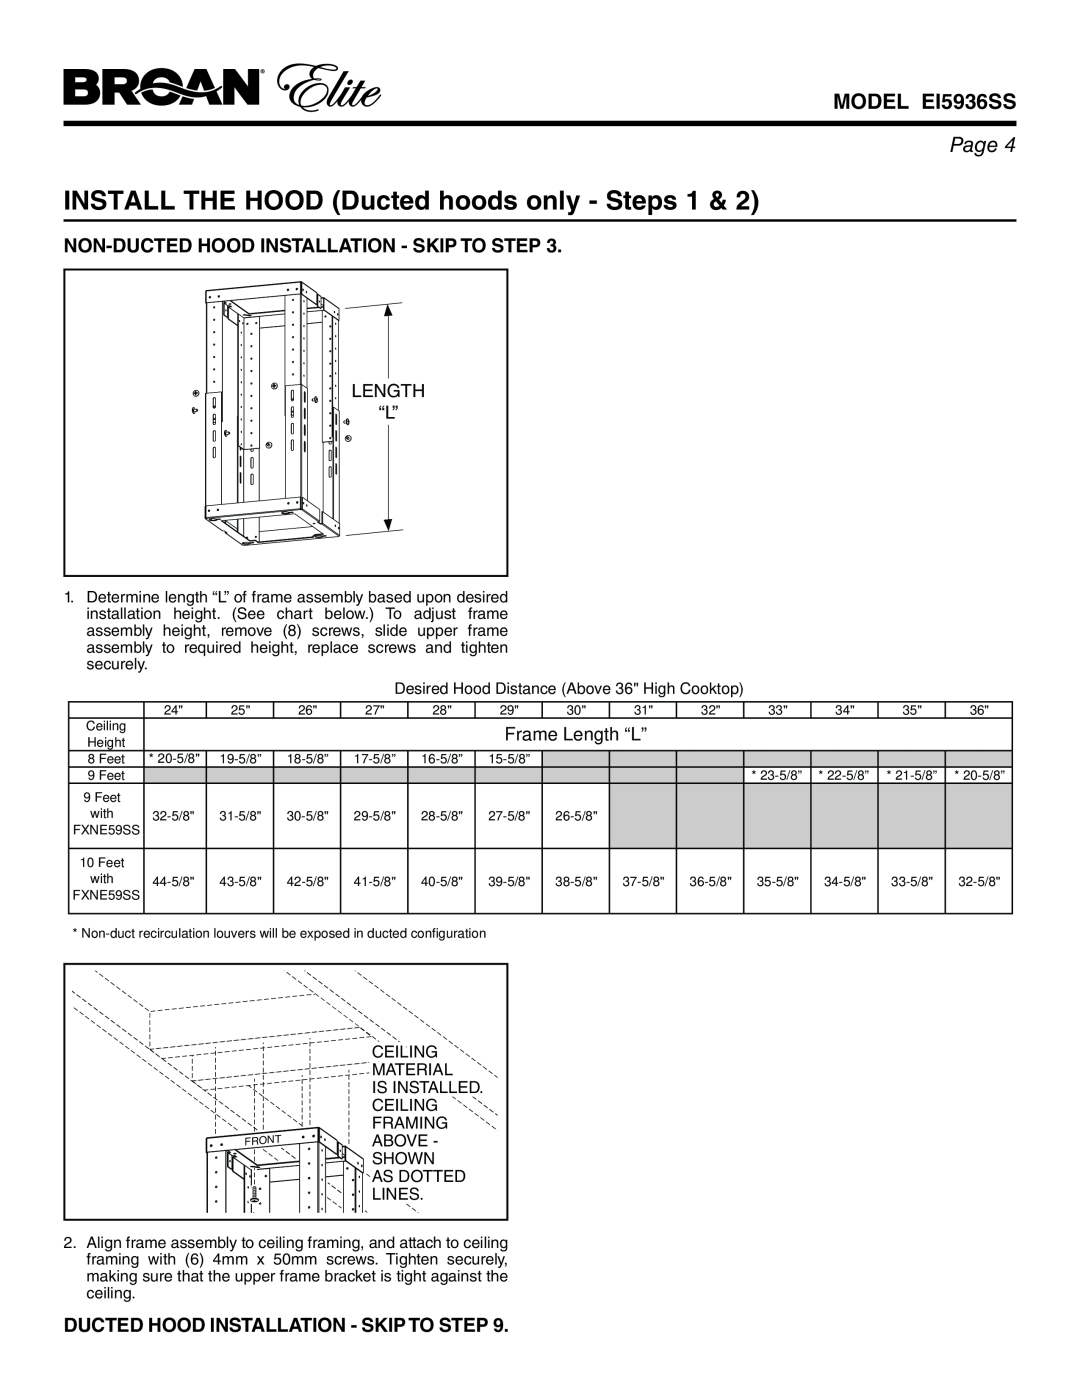 Broan EI5936SS INSTALL THE HOOD Ducted hoods only - Steps, Non-Ducted Hood Installation - Skip To Step, Length, Ceiling 